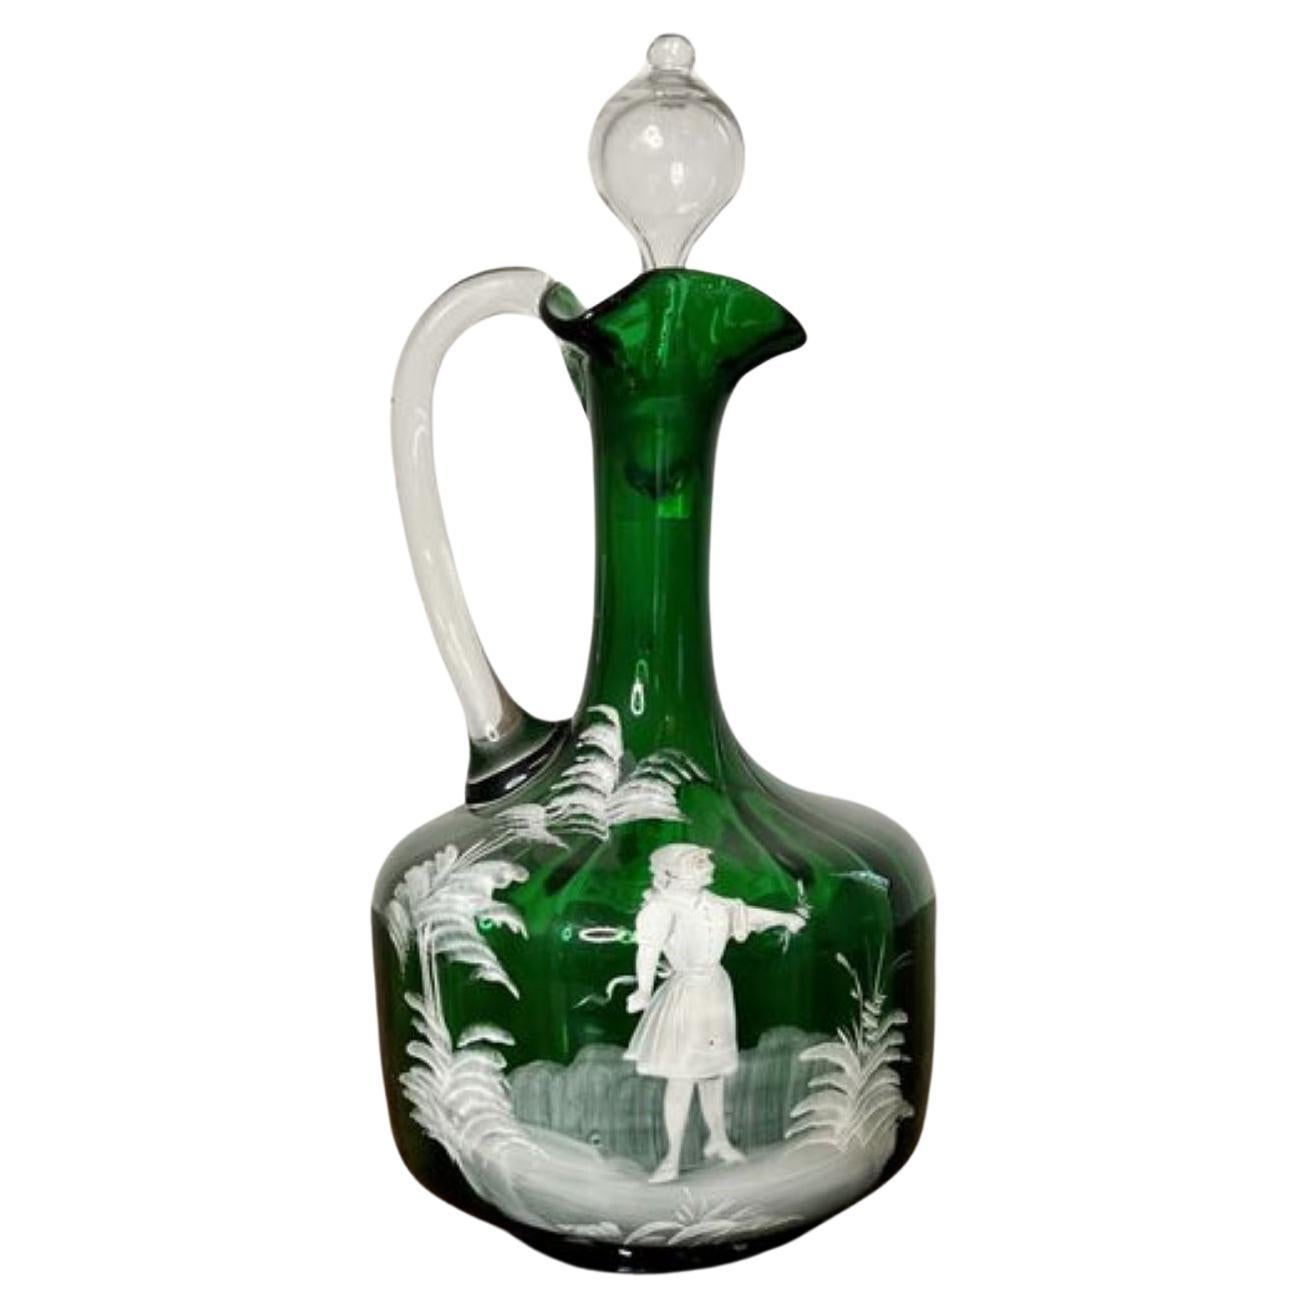 Stunning quality antique Victorian Mary Gregory green glass ewer 